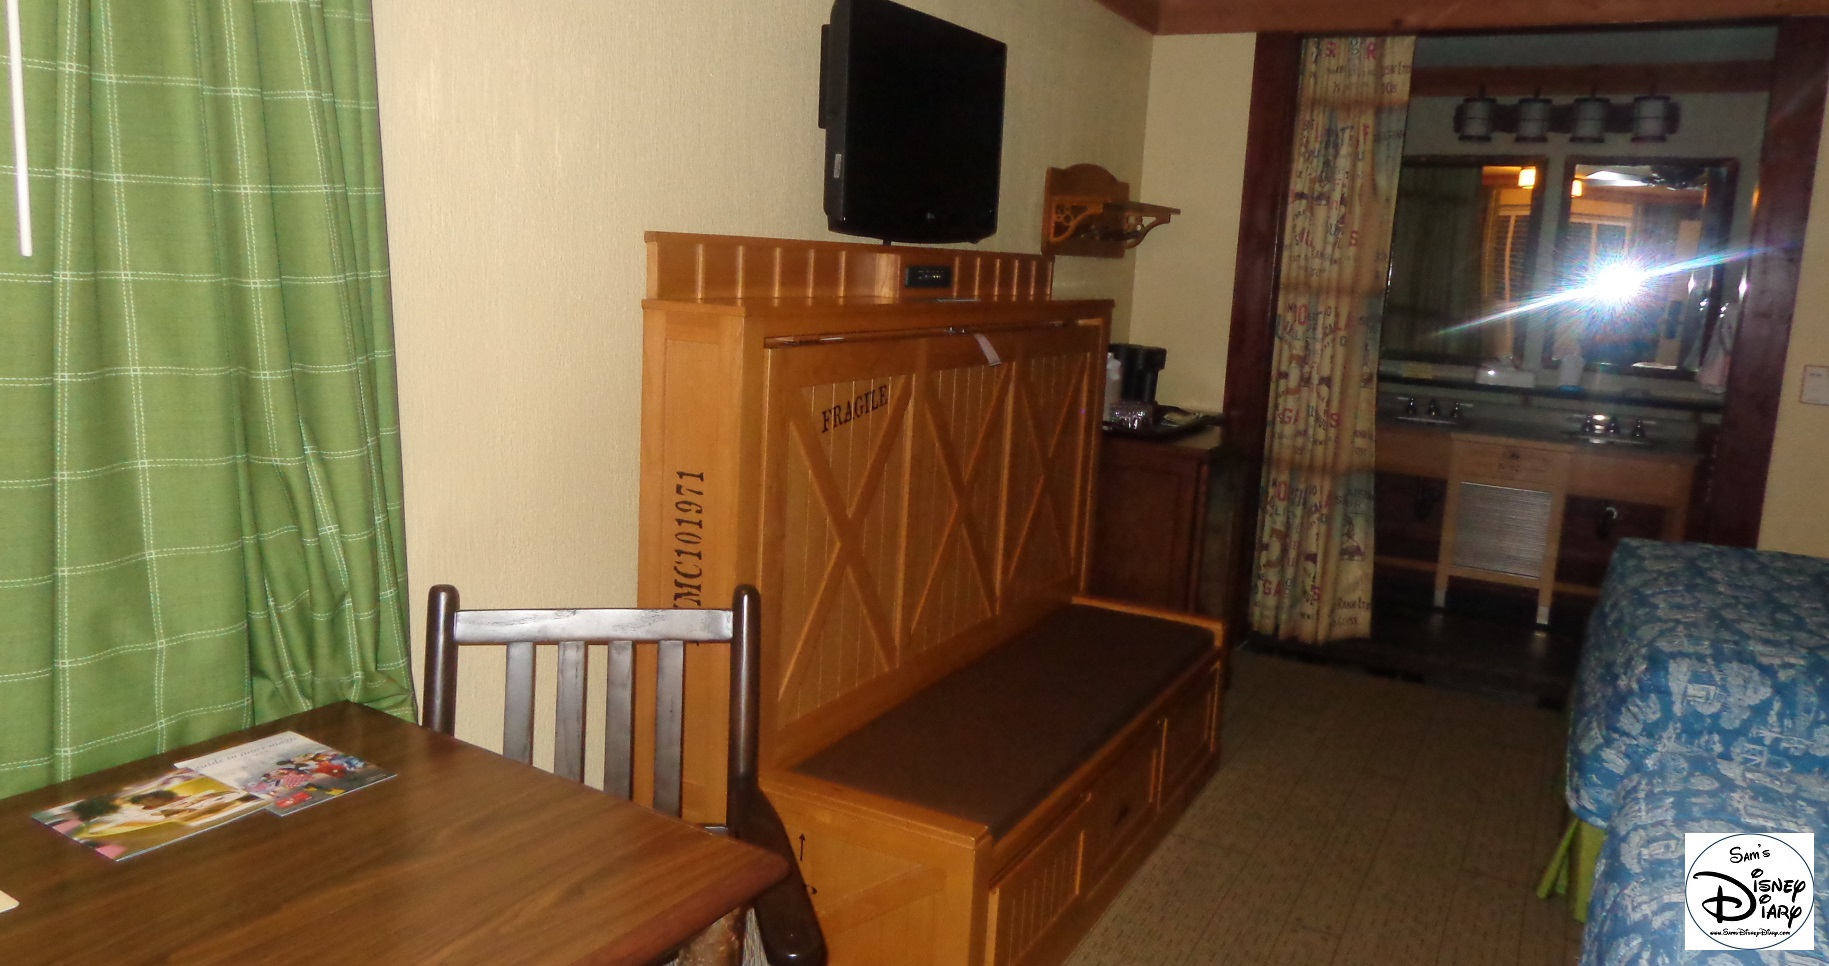 Inside an Alligator Bayou room. The Banquette Bench Seat folds down to reveal a 63"x30" bed.